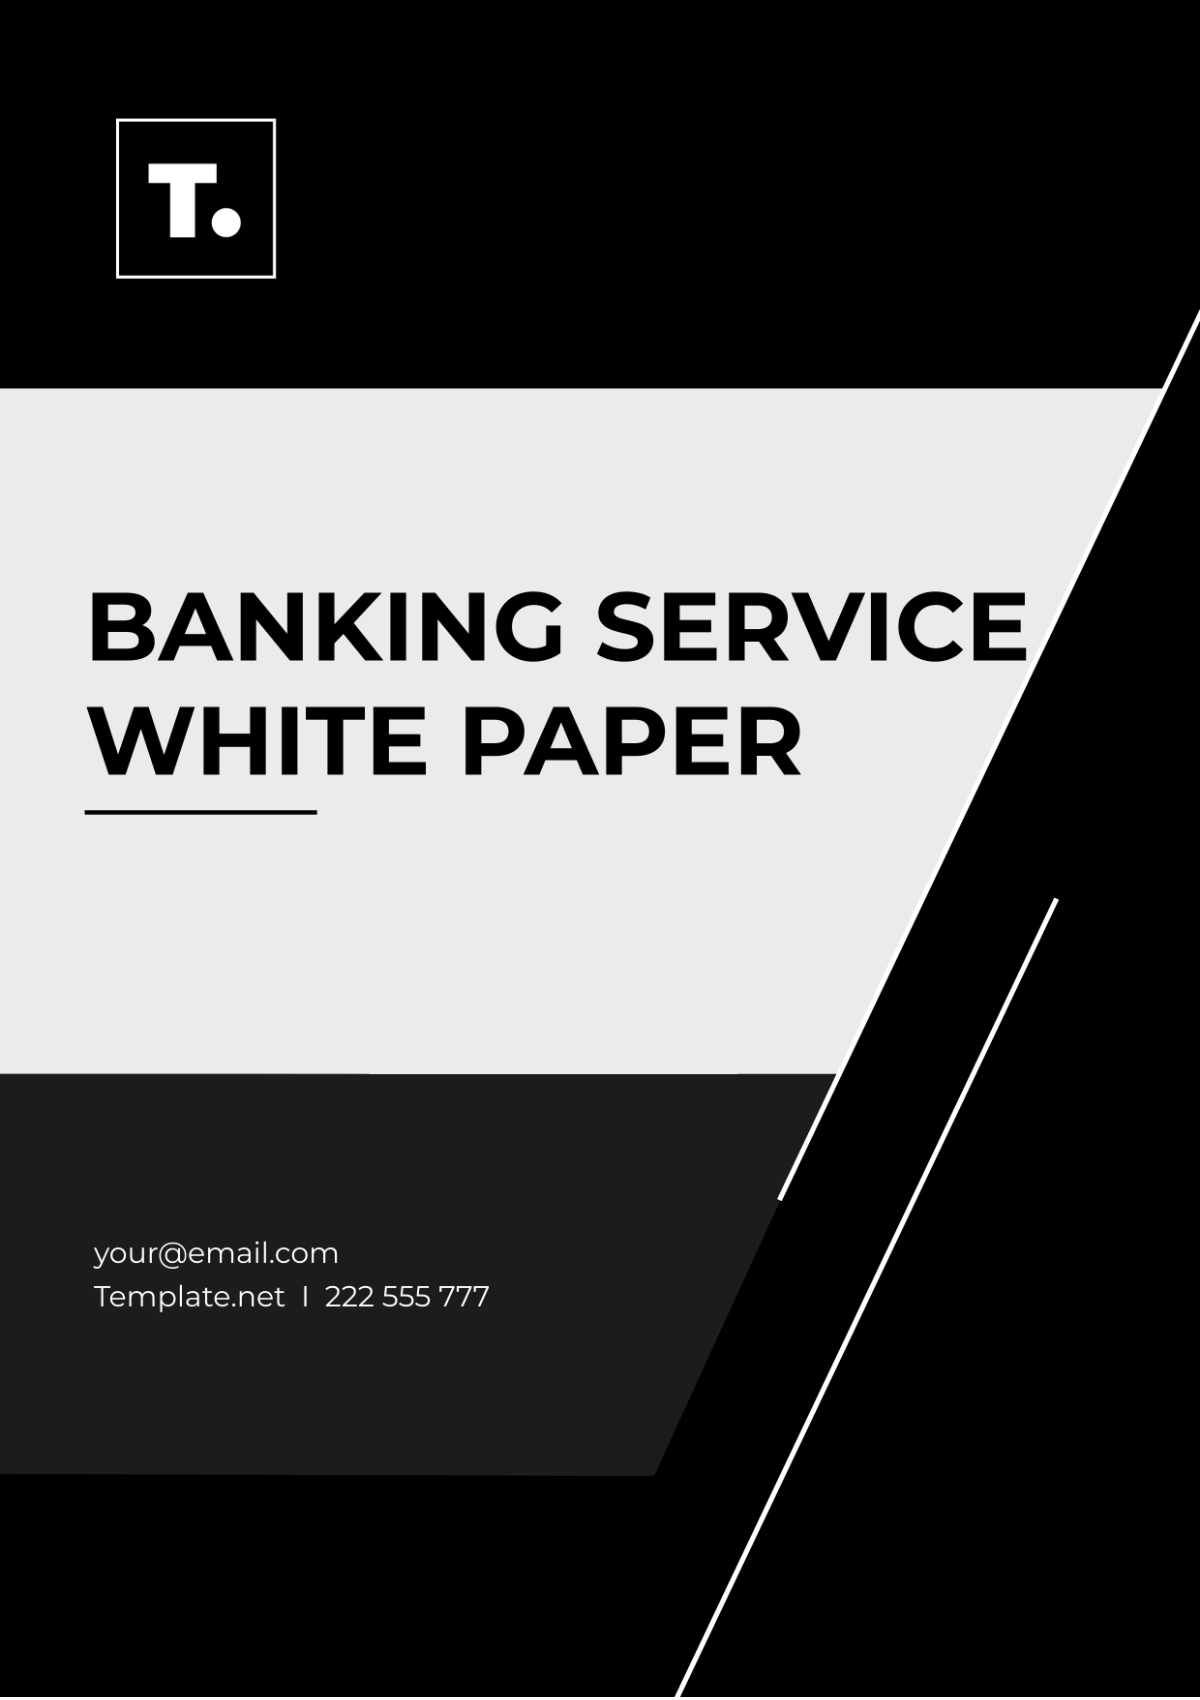 Banking Service White Paper Template